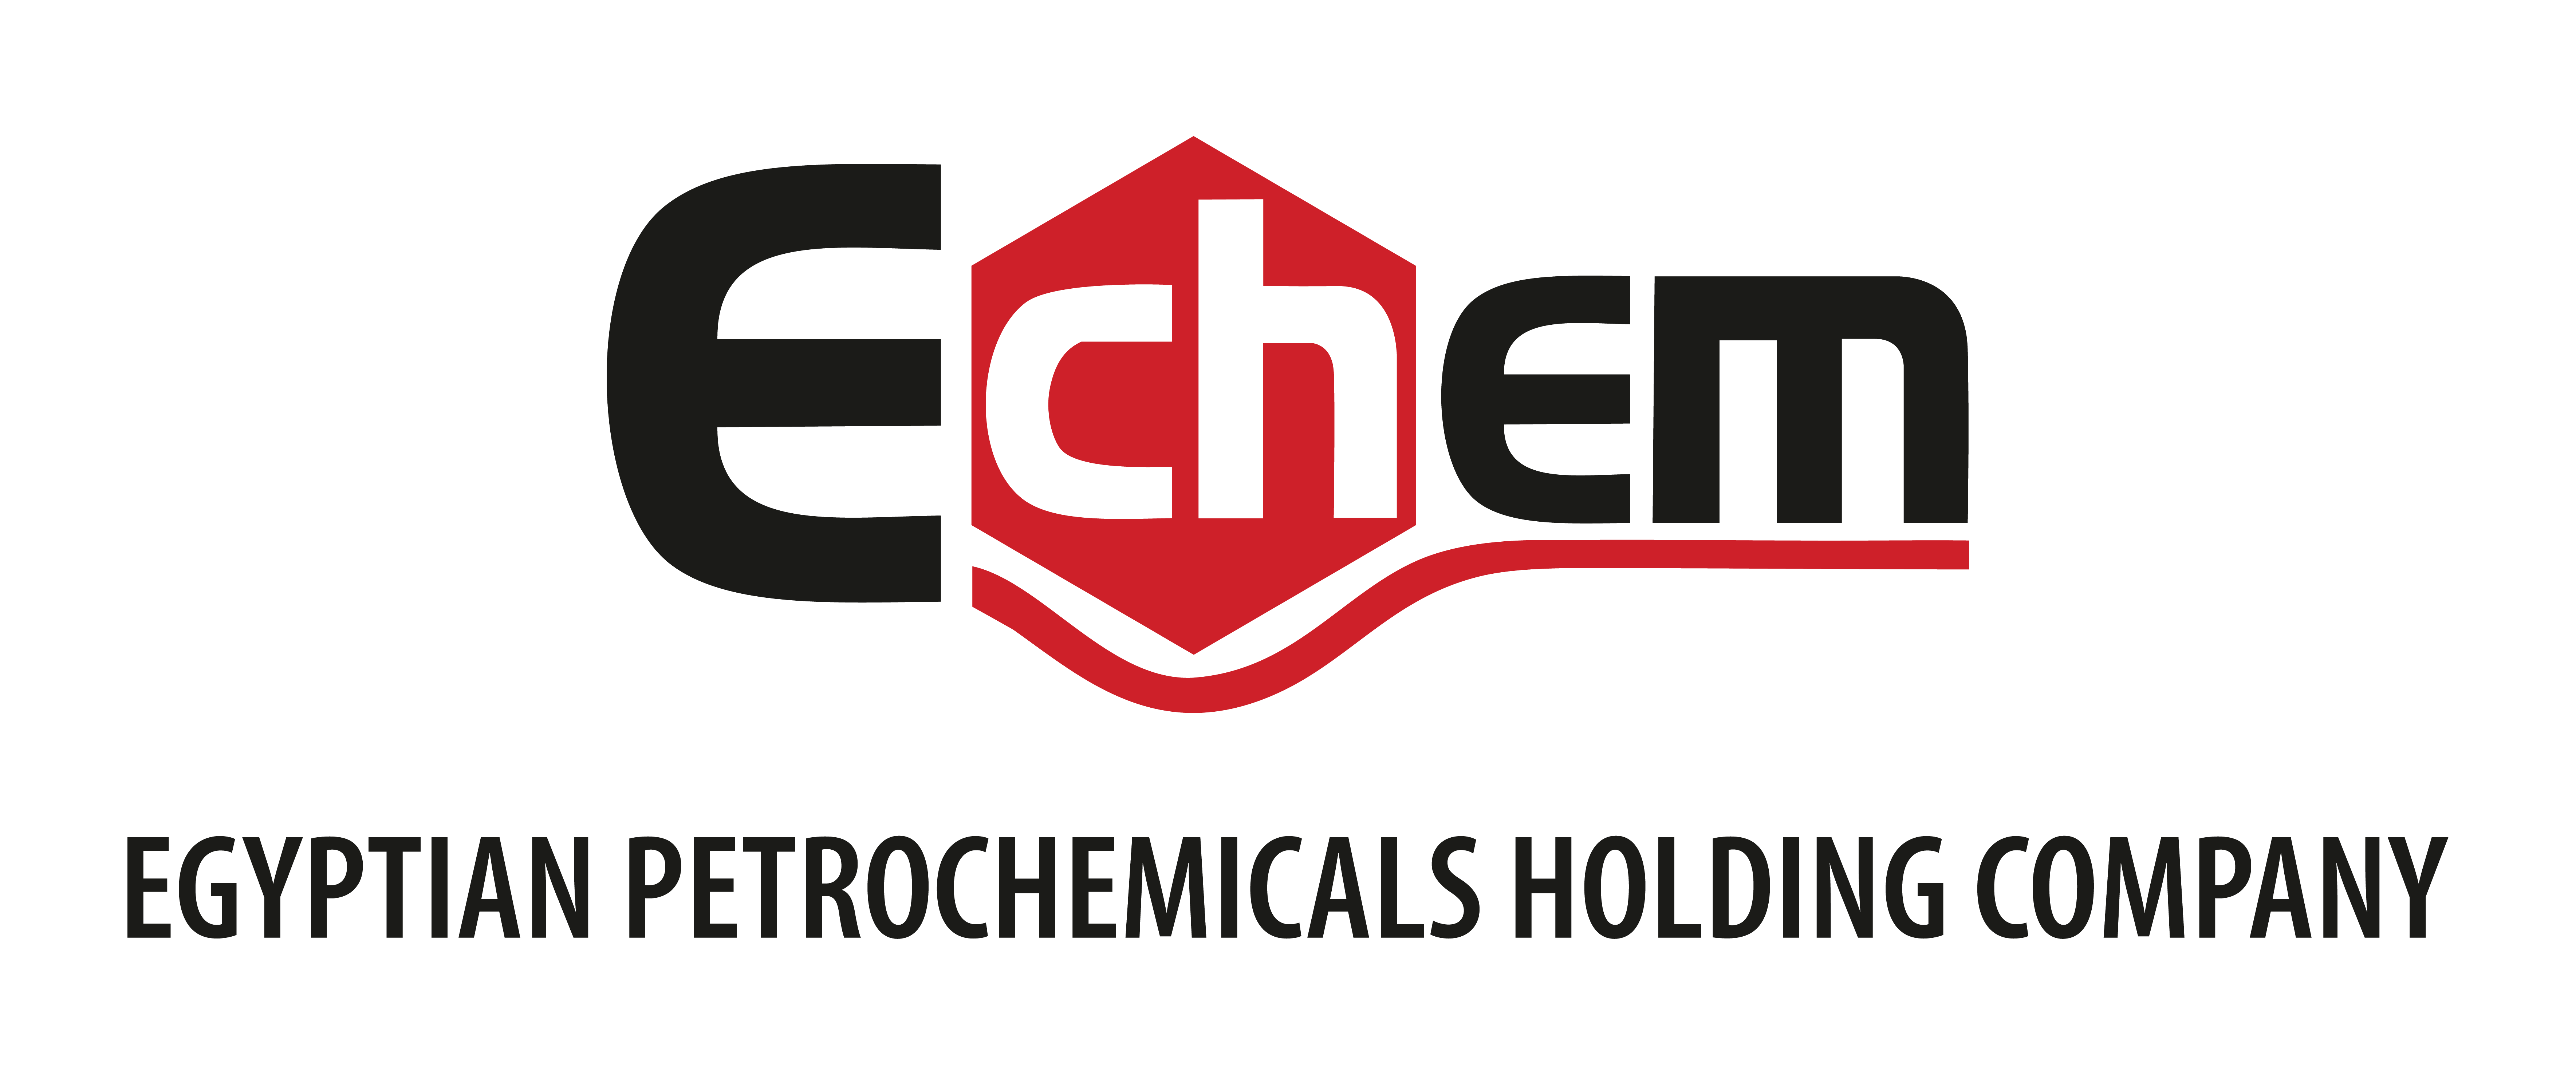 Egyptian Petrochemicals Holding Company